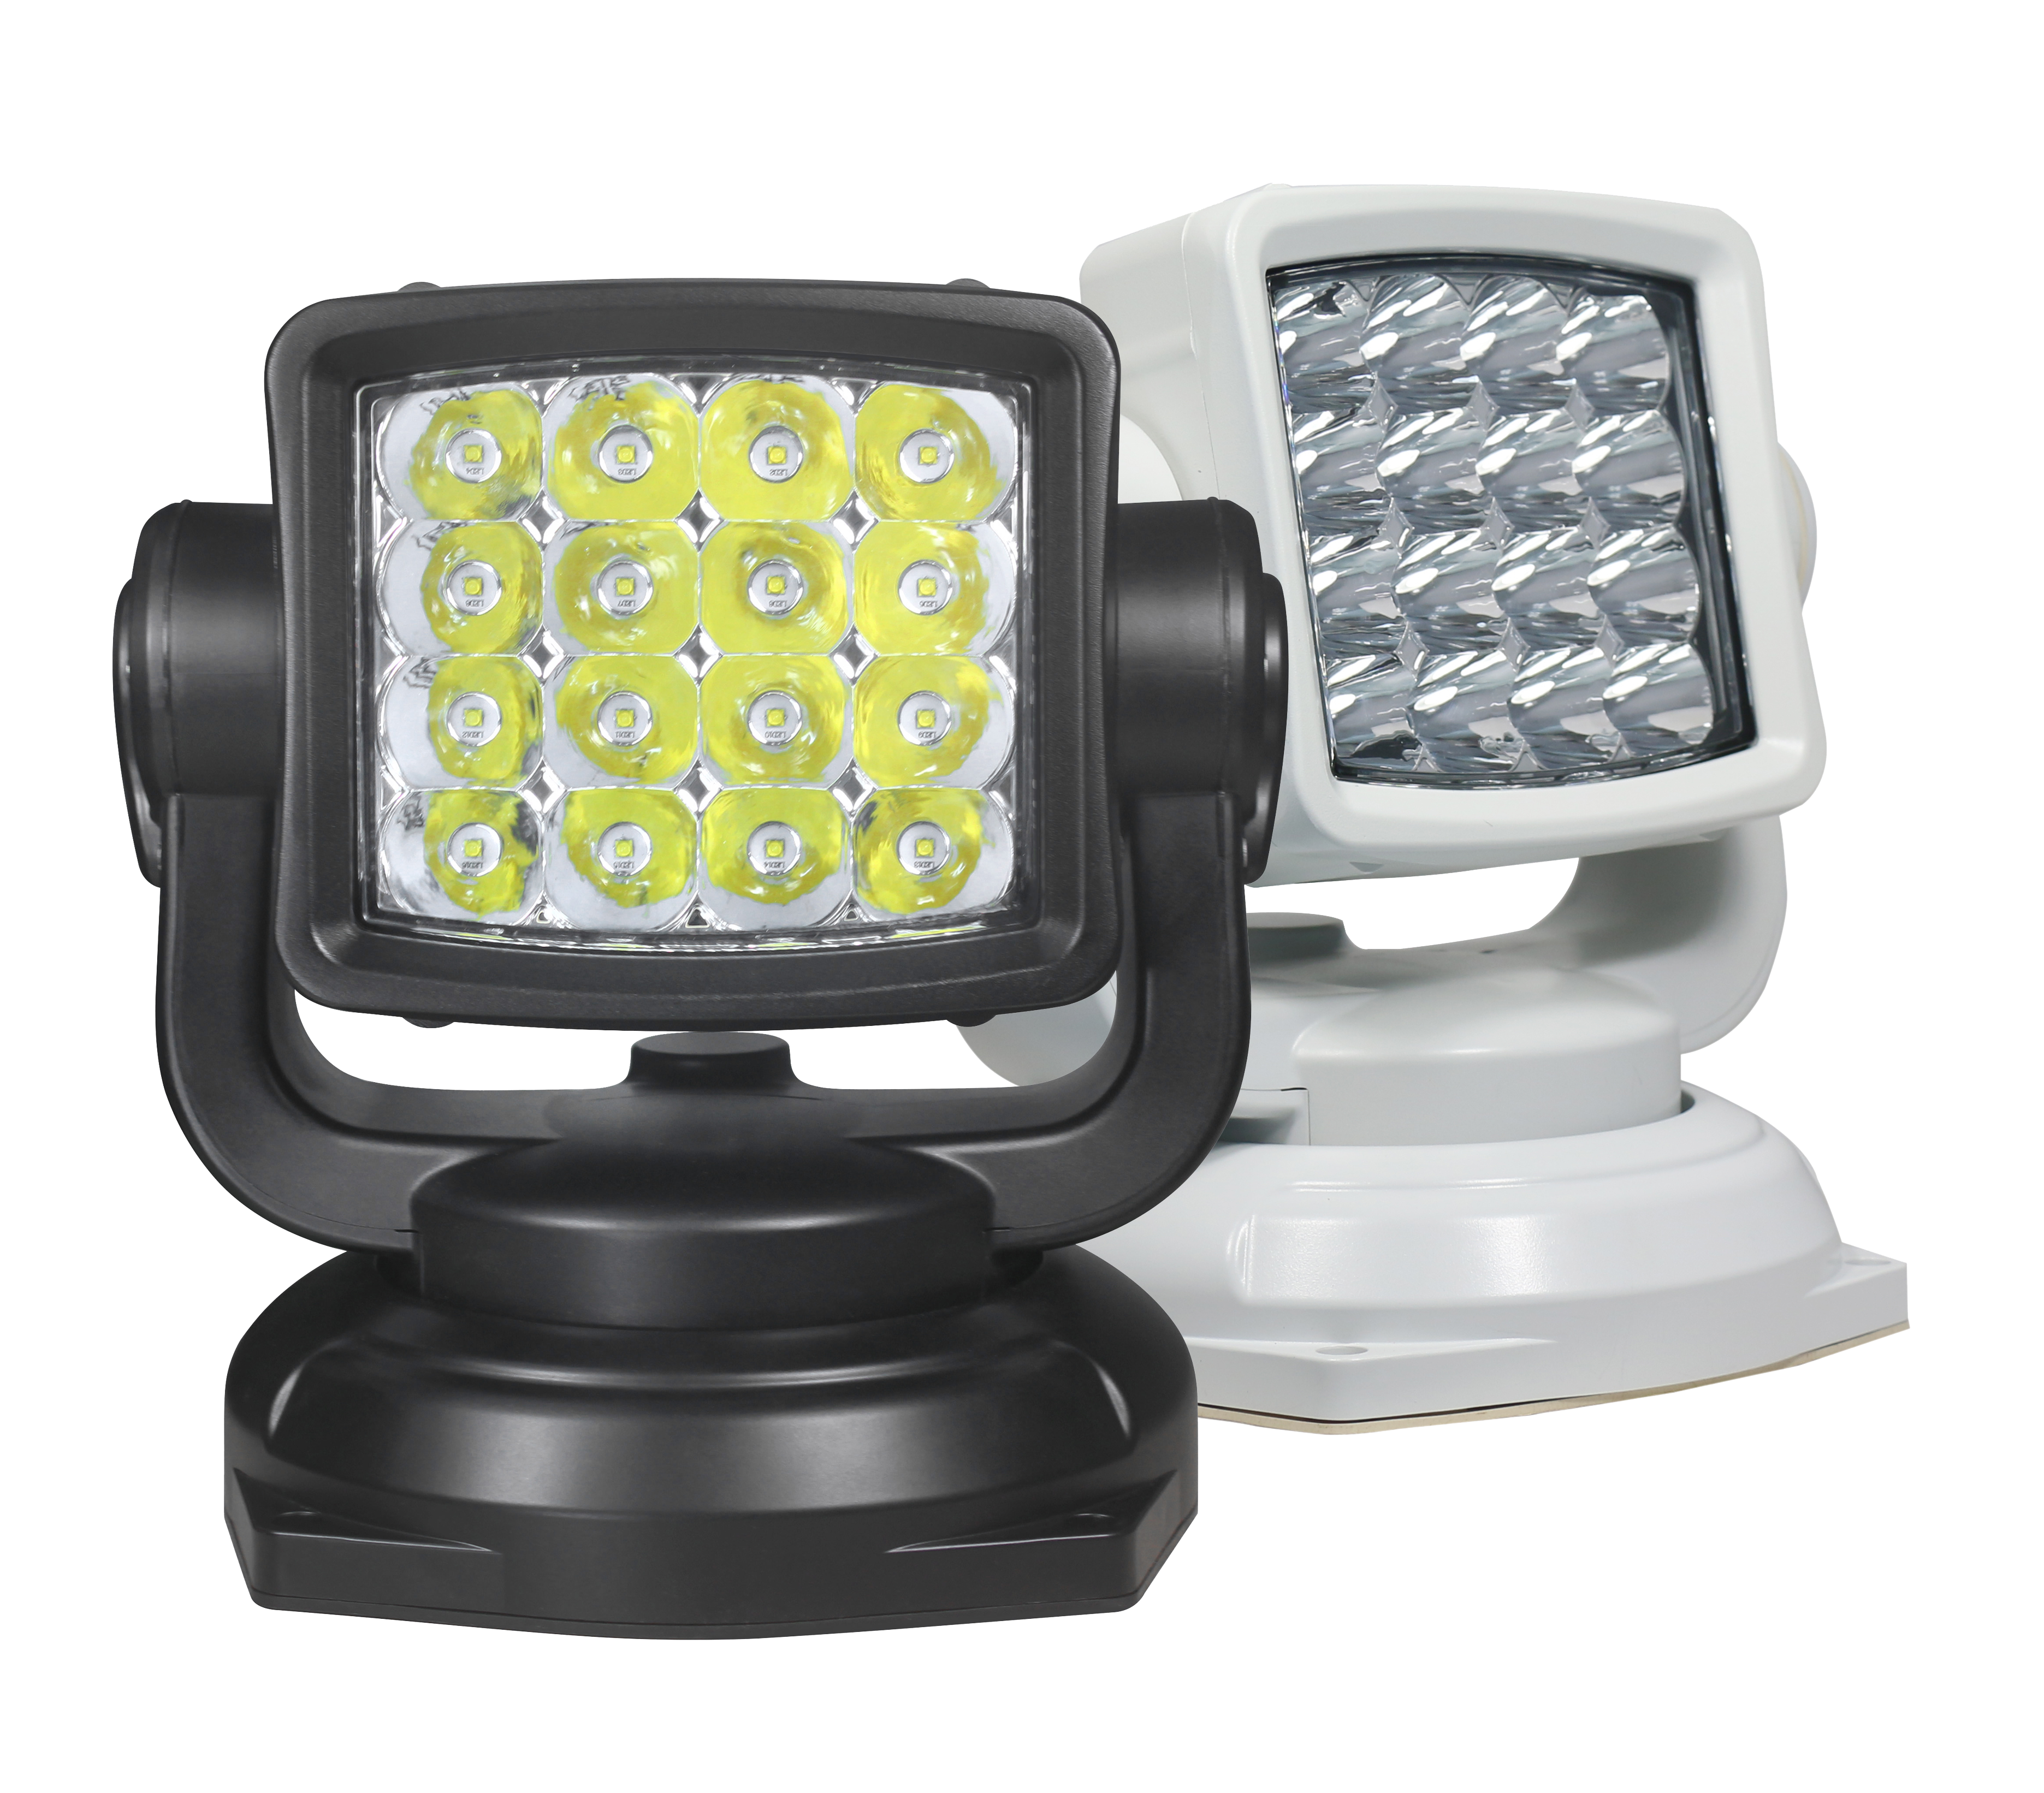 TVH Adds New LED Searchlight